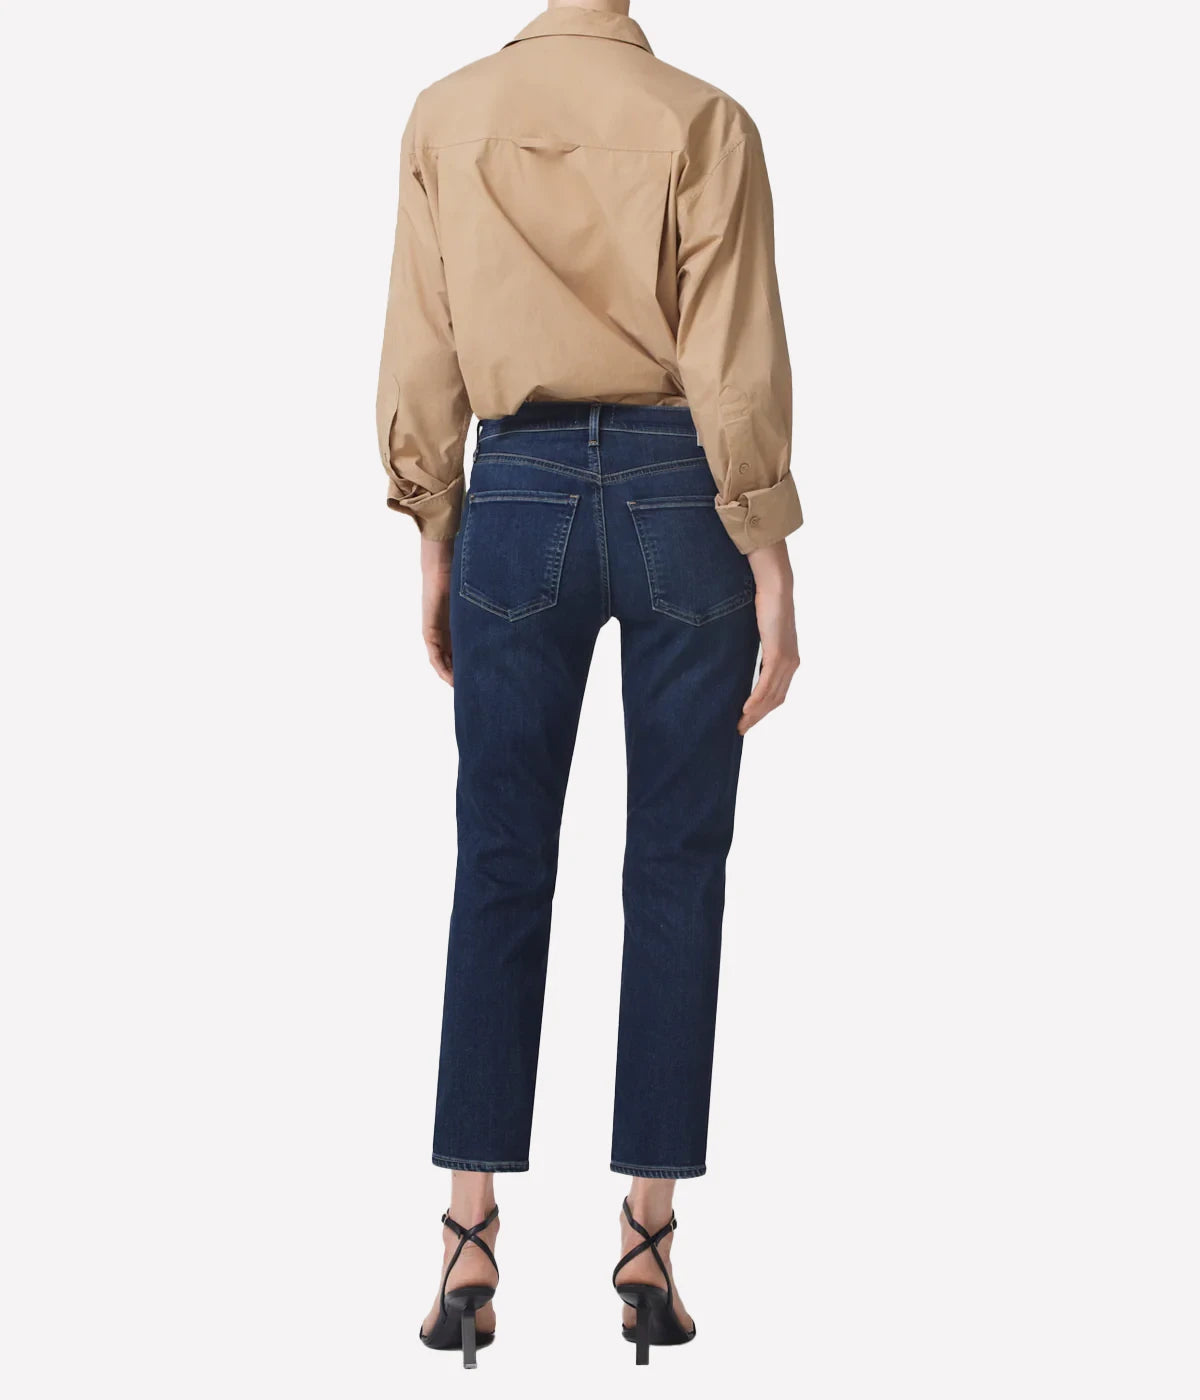 Isola Straight Crop Jean in Courtland